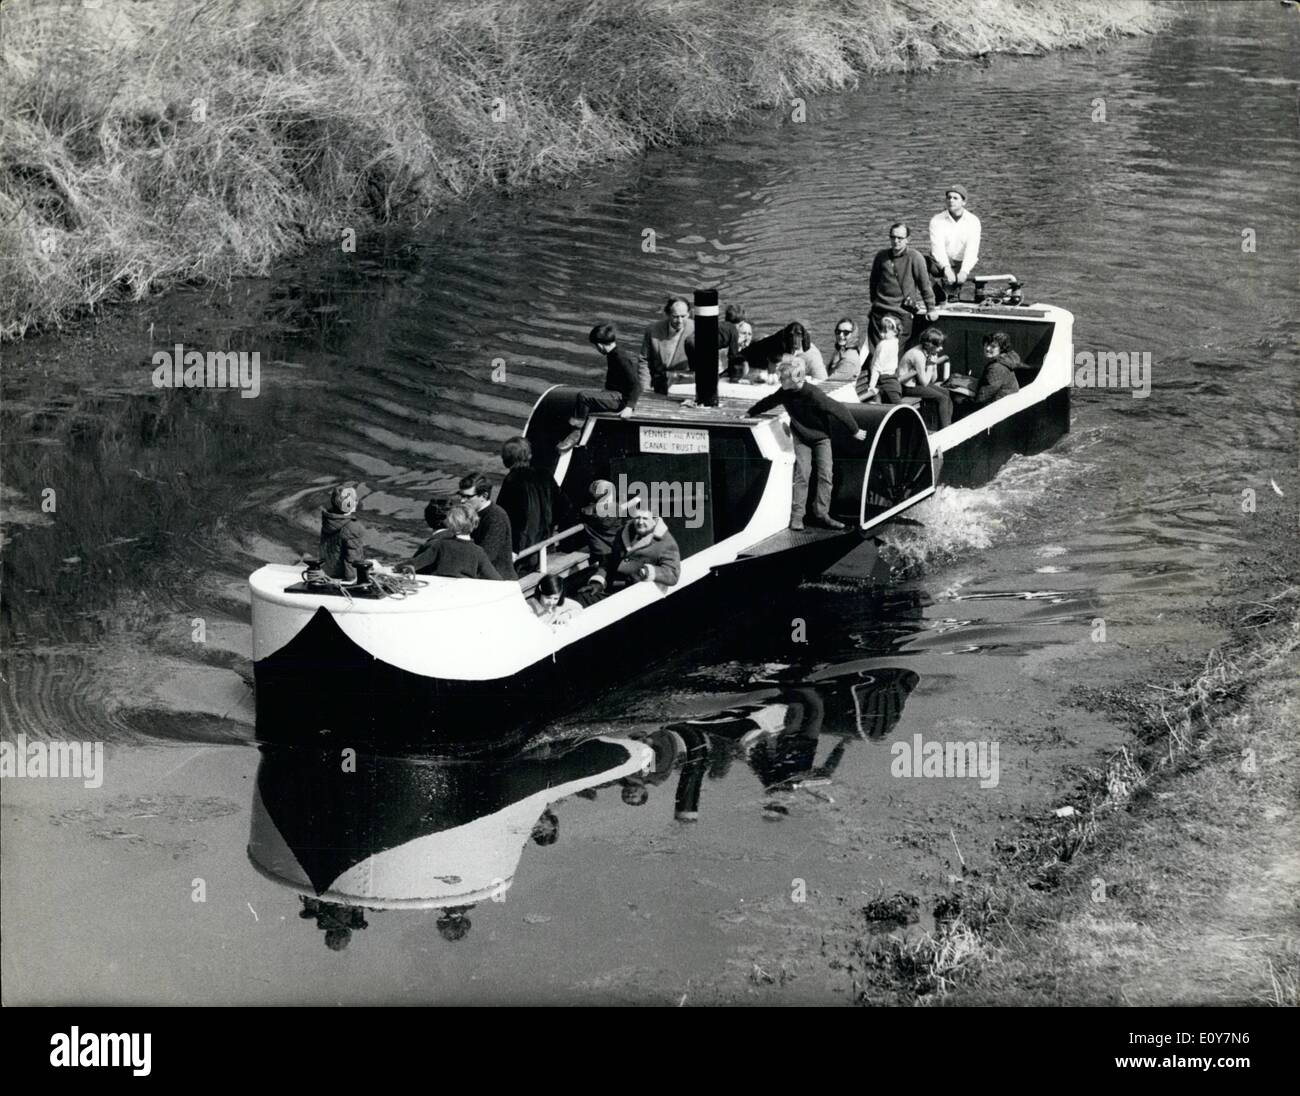 Apr. 04, 1969 - Paddle boat brings hope for canal.; Gen. Sir Hugh Stockwell,commander of the Allied land forces in the 1956 Suez operation, successfully launched a new campaign when she steered the six-ton paddle boat Charlotte Dundas on her maiden passenger voyage along the Kennet and Avon canal at Devizes, Wilts, yesterday. ''This voyage means that the canal can be made to work,'' said Sir Hugh, who is chairman of the Canal Trust. The Trust see yesterday's 30-minute trip, made at a comfortable two miles an hour, as a major step towards opening up the canal for public pleasure craft Stock Photo